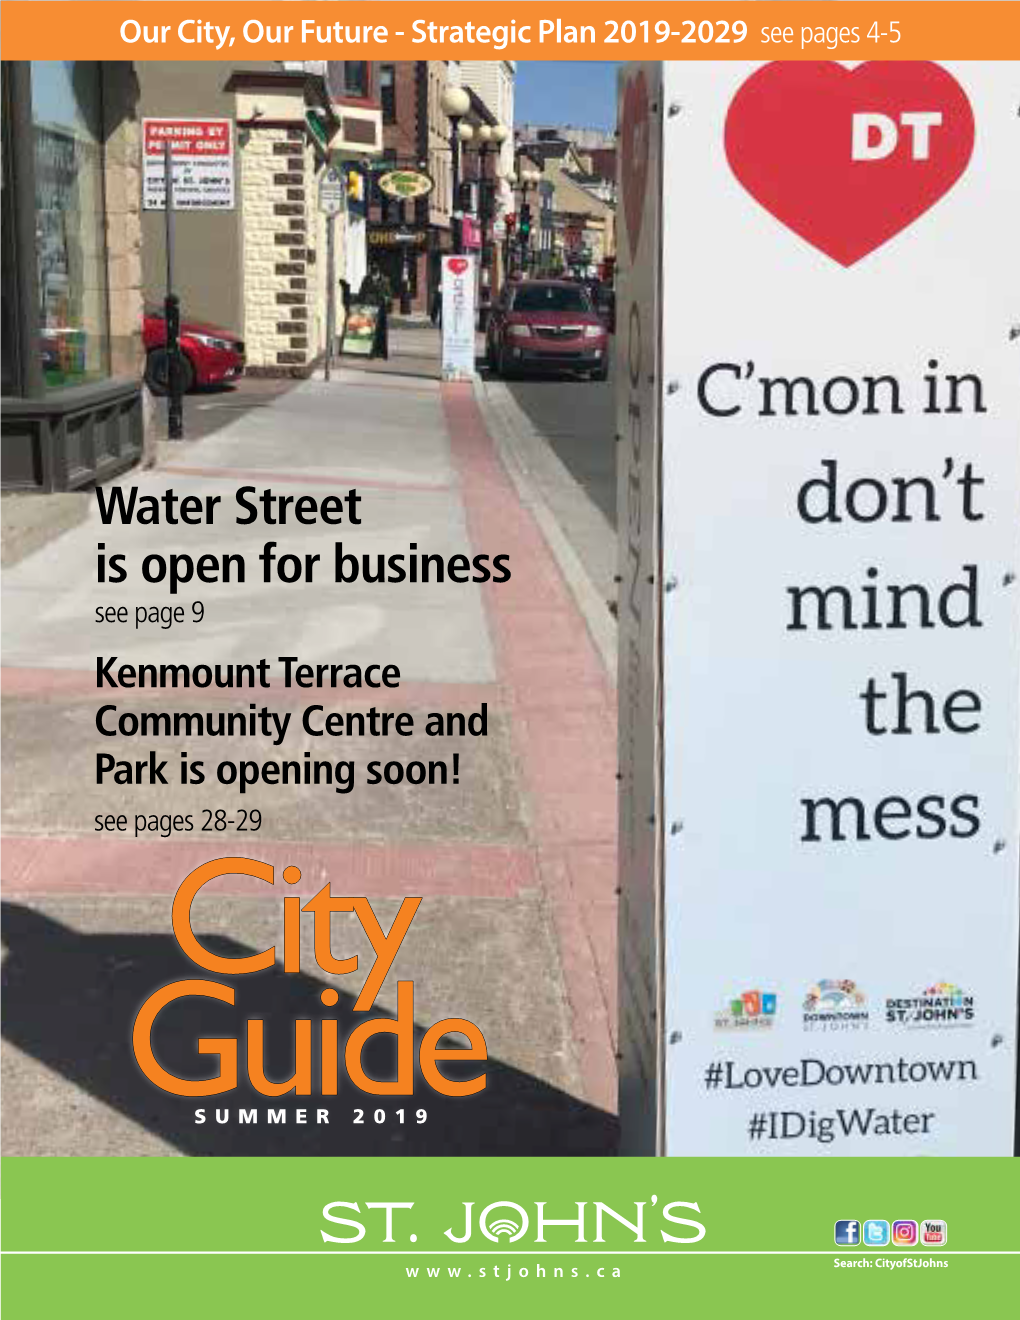 Water Street Is Open for Business See Page 9 Kenmount Terrace Community Centre and Park Is Opening Soon! See Pages 28-29 City